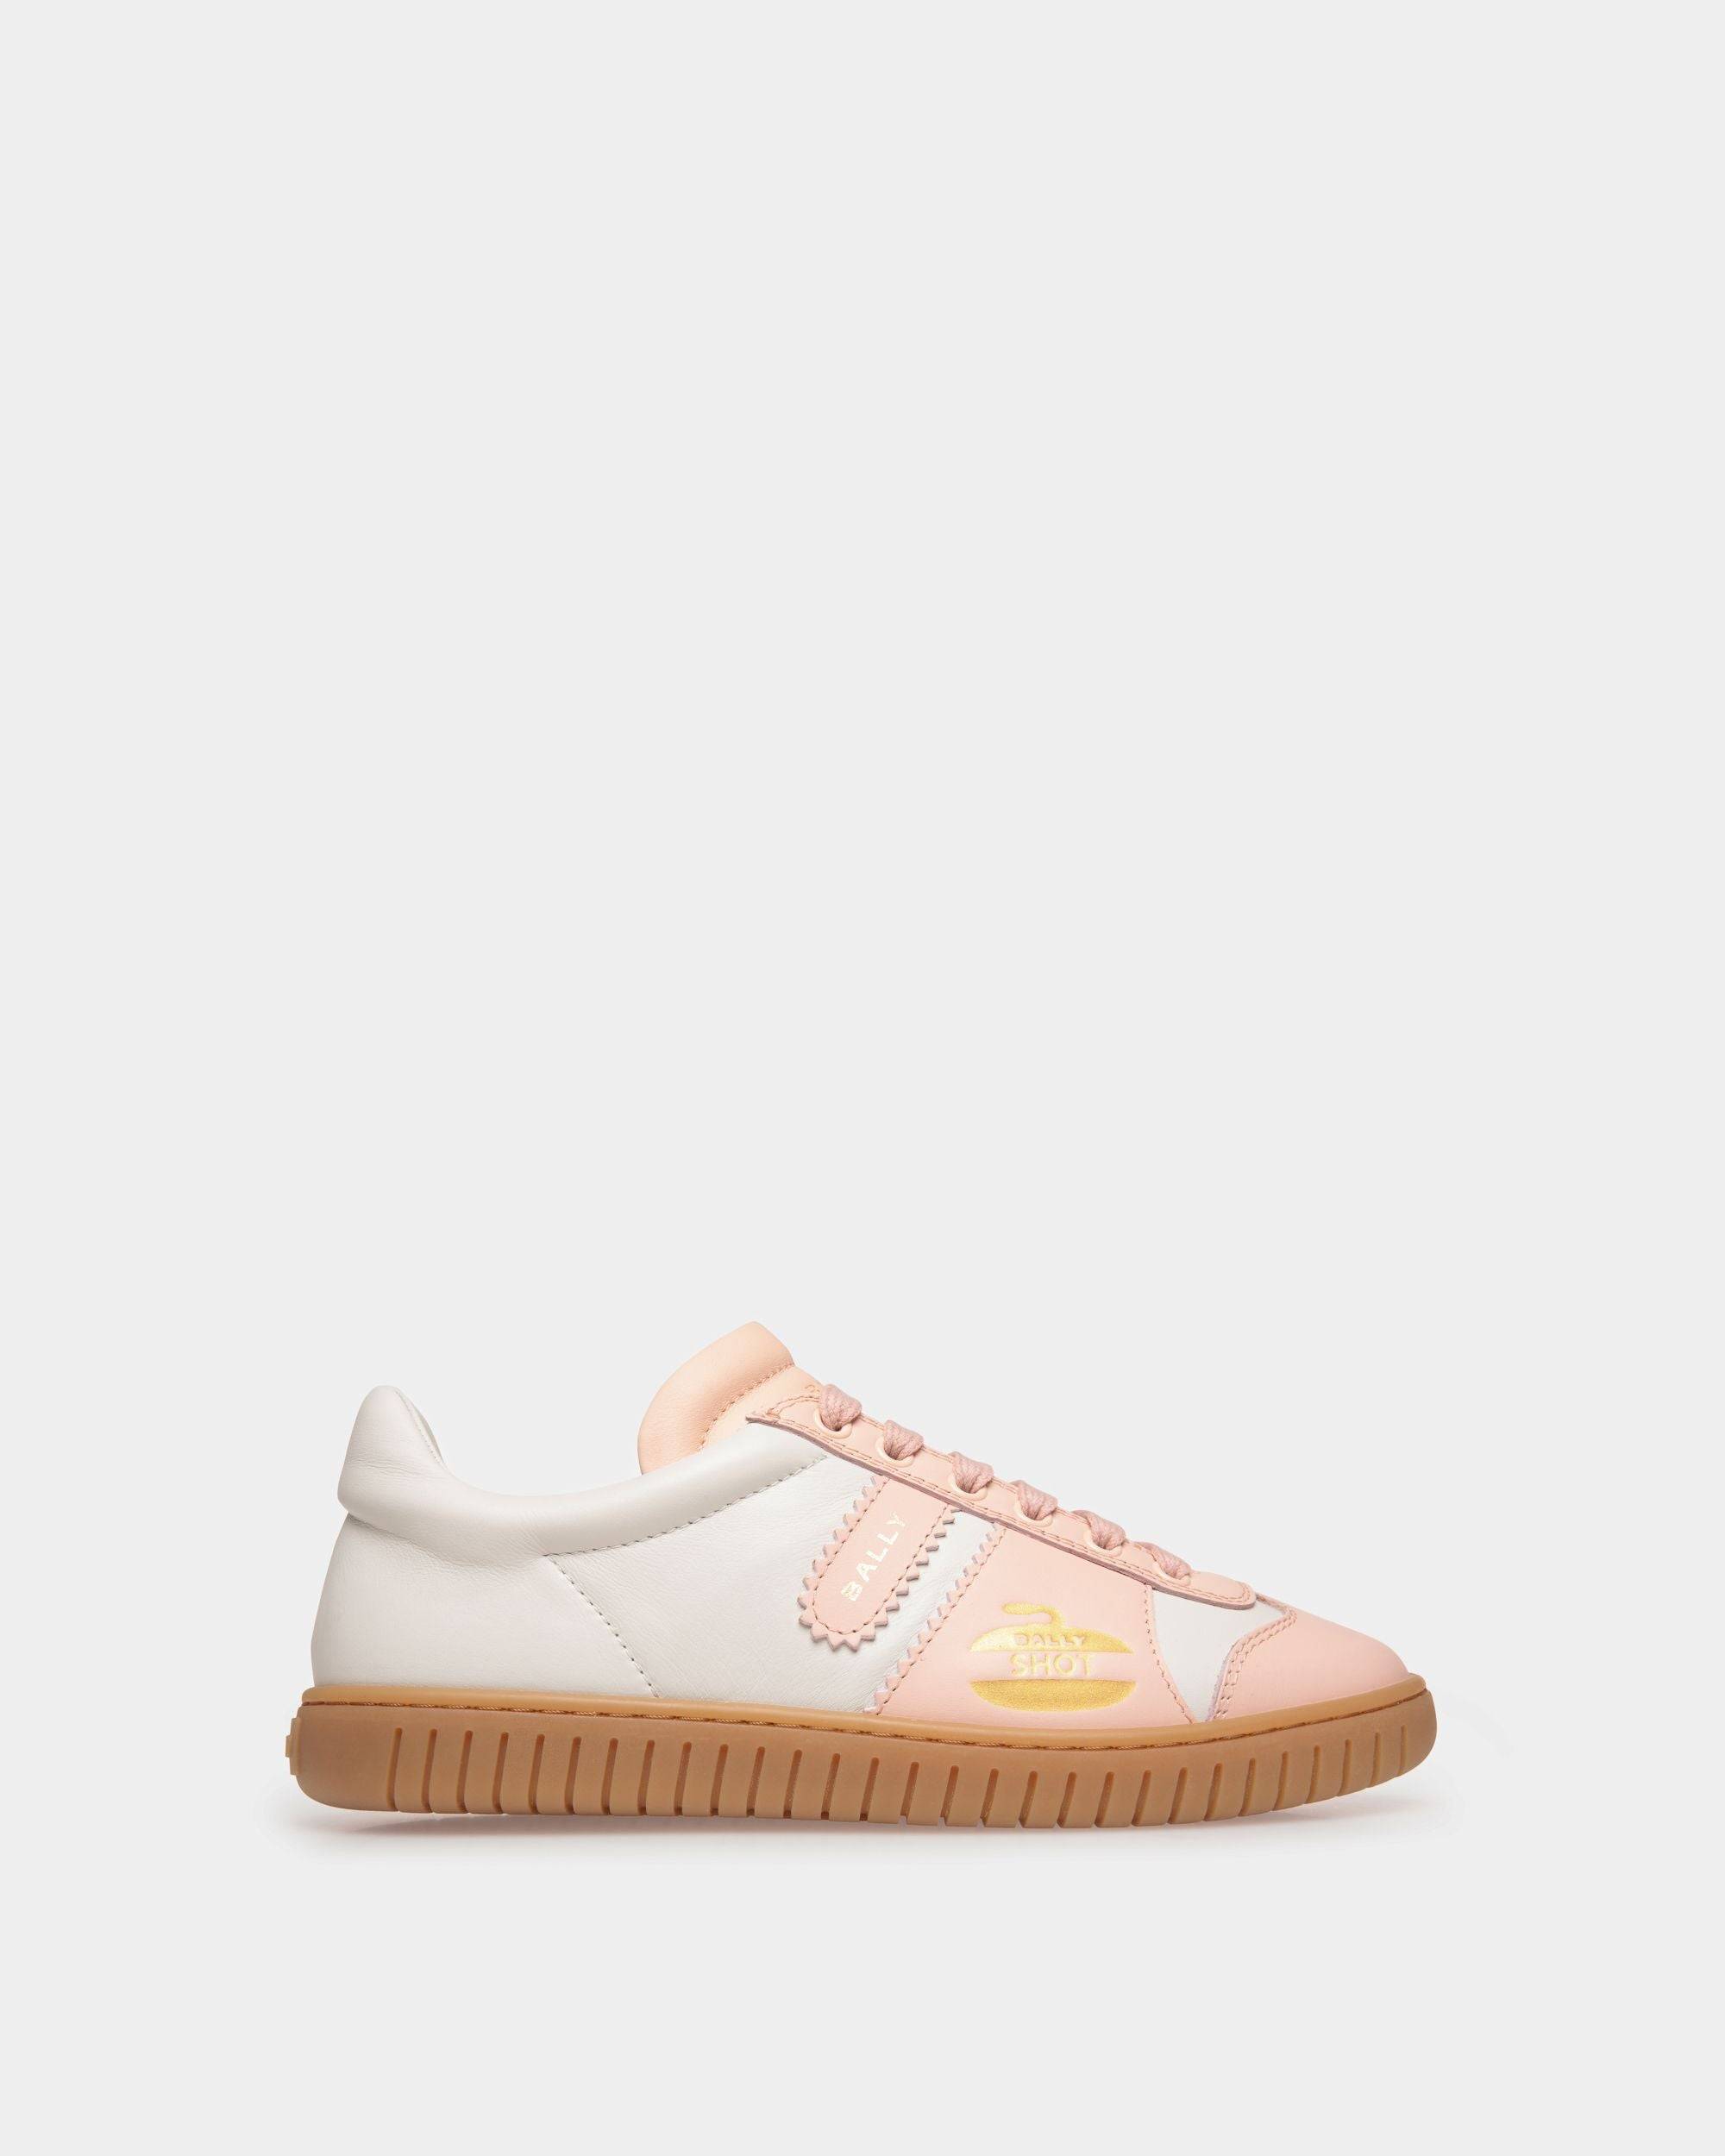 Player | Women's Sneaker in White and Baby Pink Leather | Bally | Still Life Side